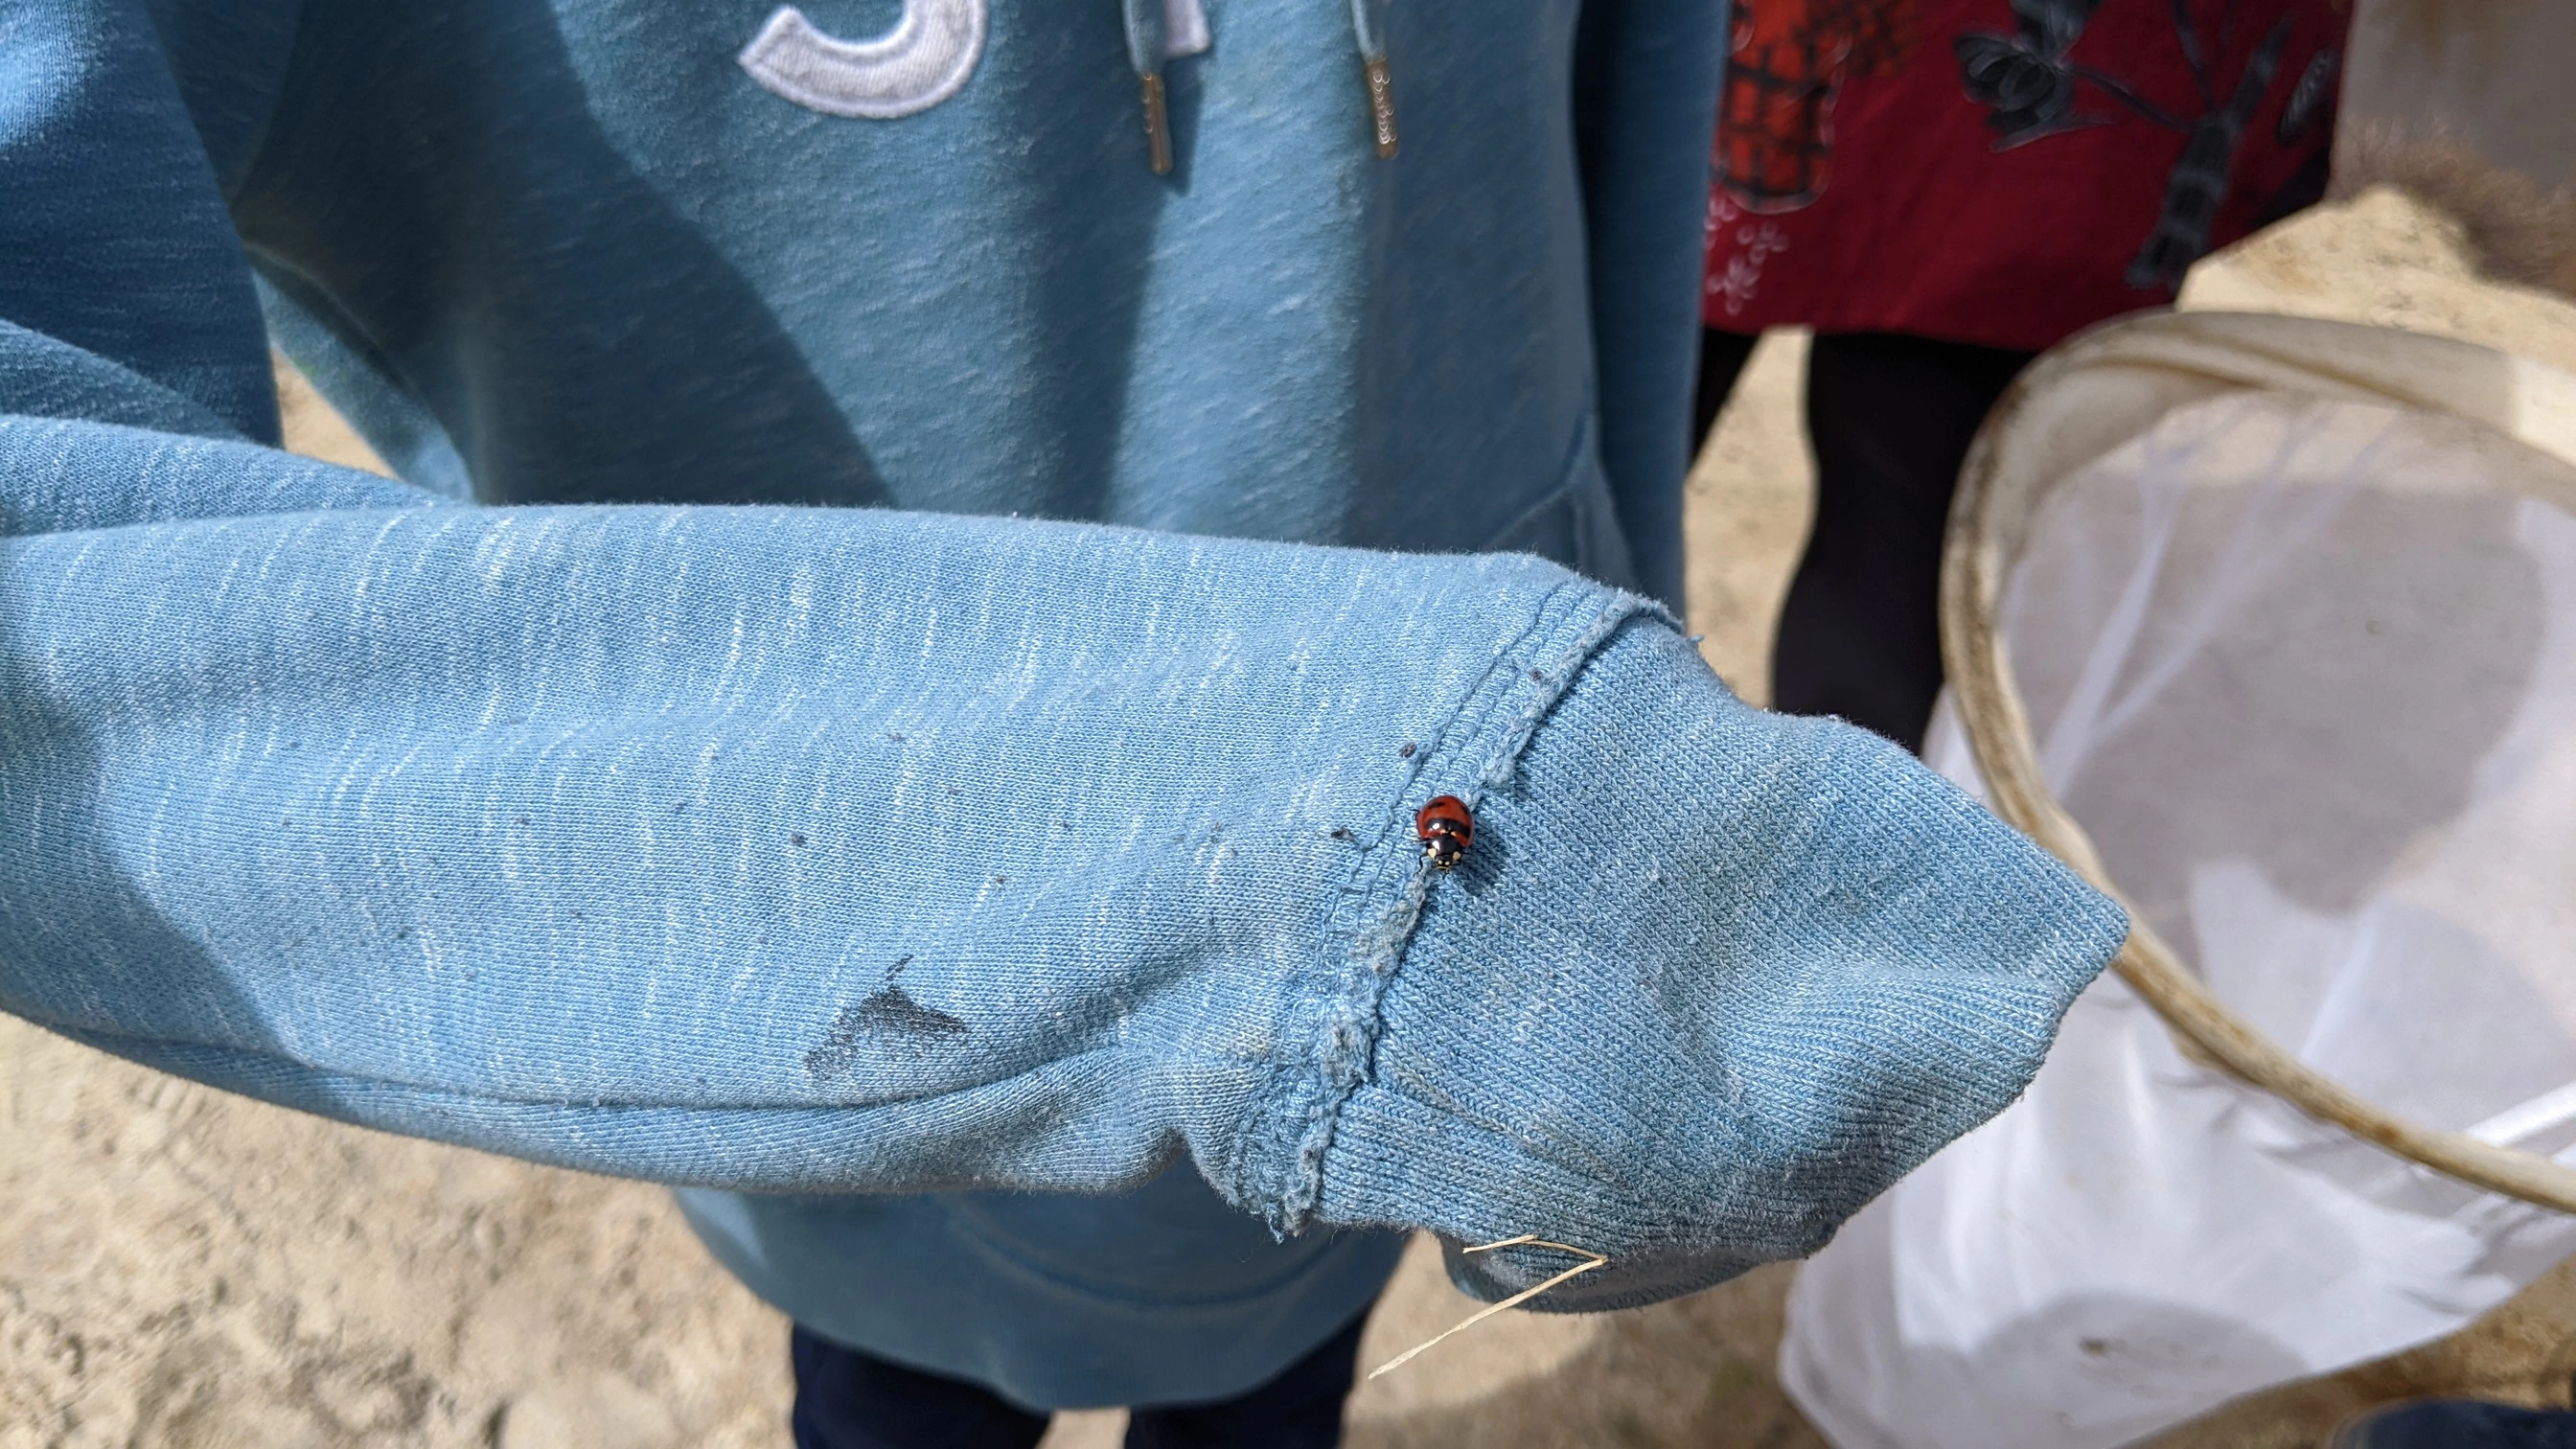 Cree students discovered a vulnerable ladybug while exploring their land with the Nunavik Sentinels program.